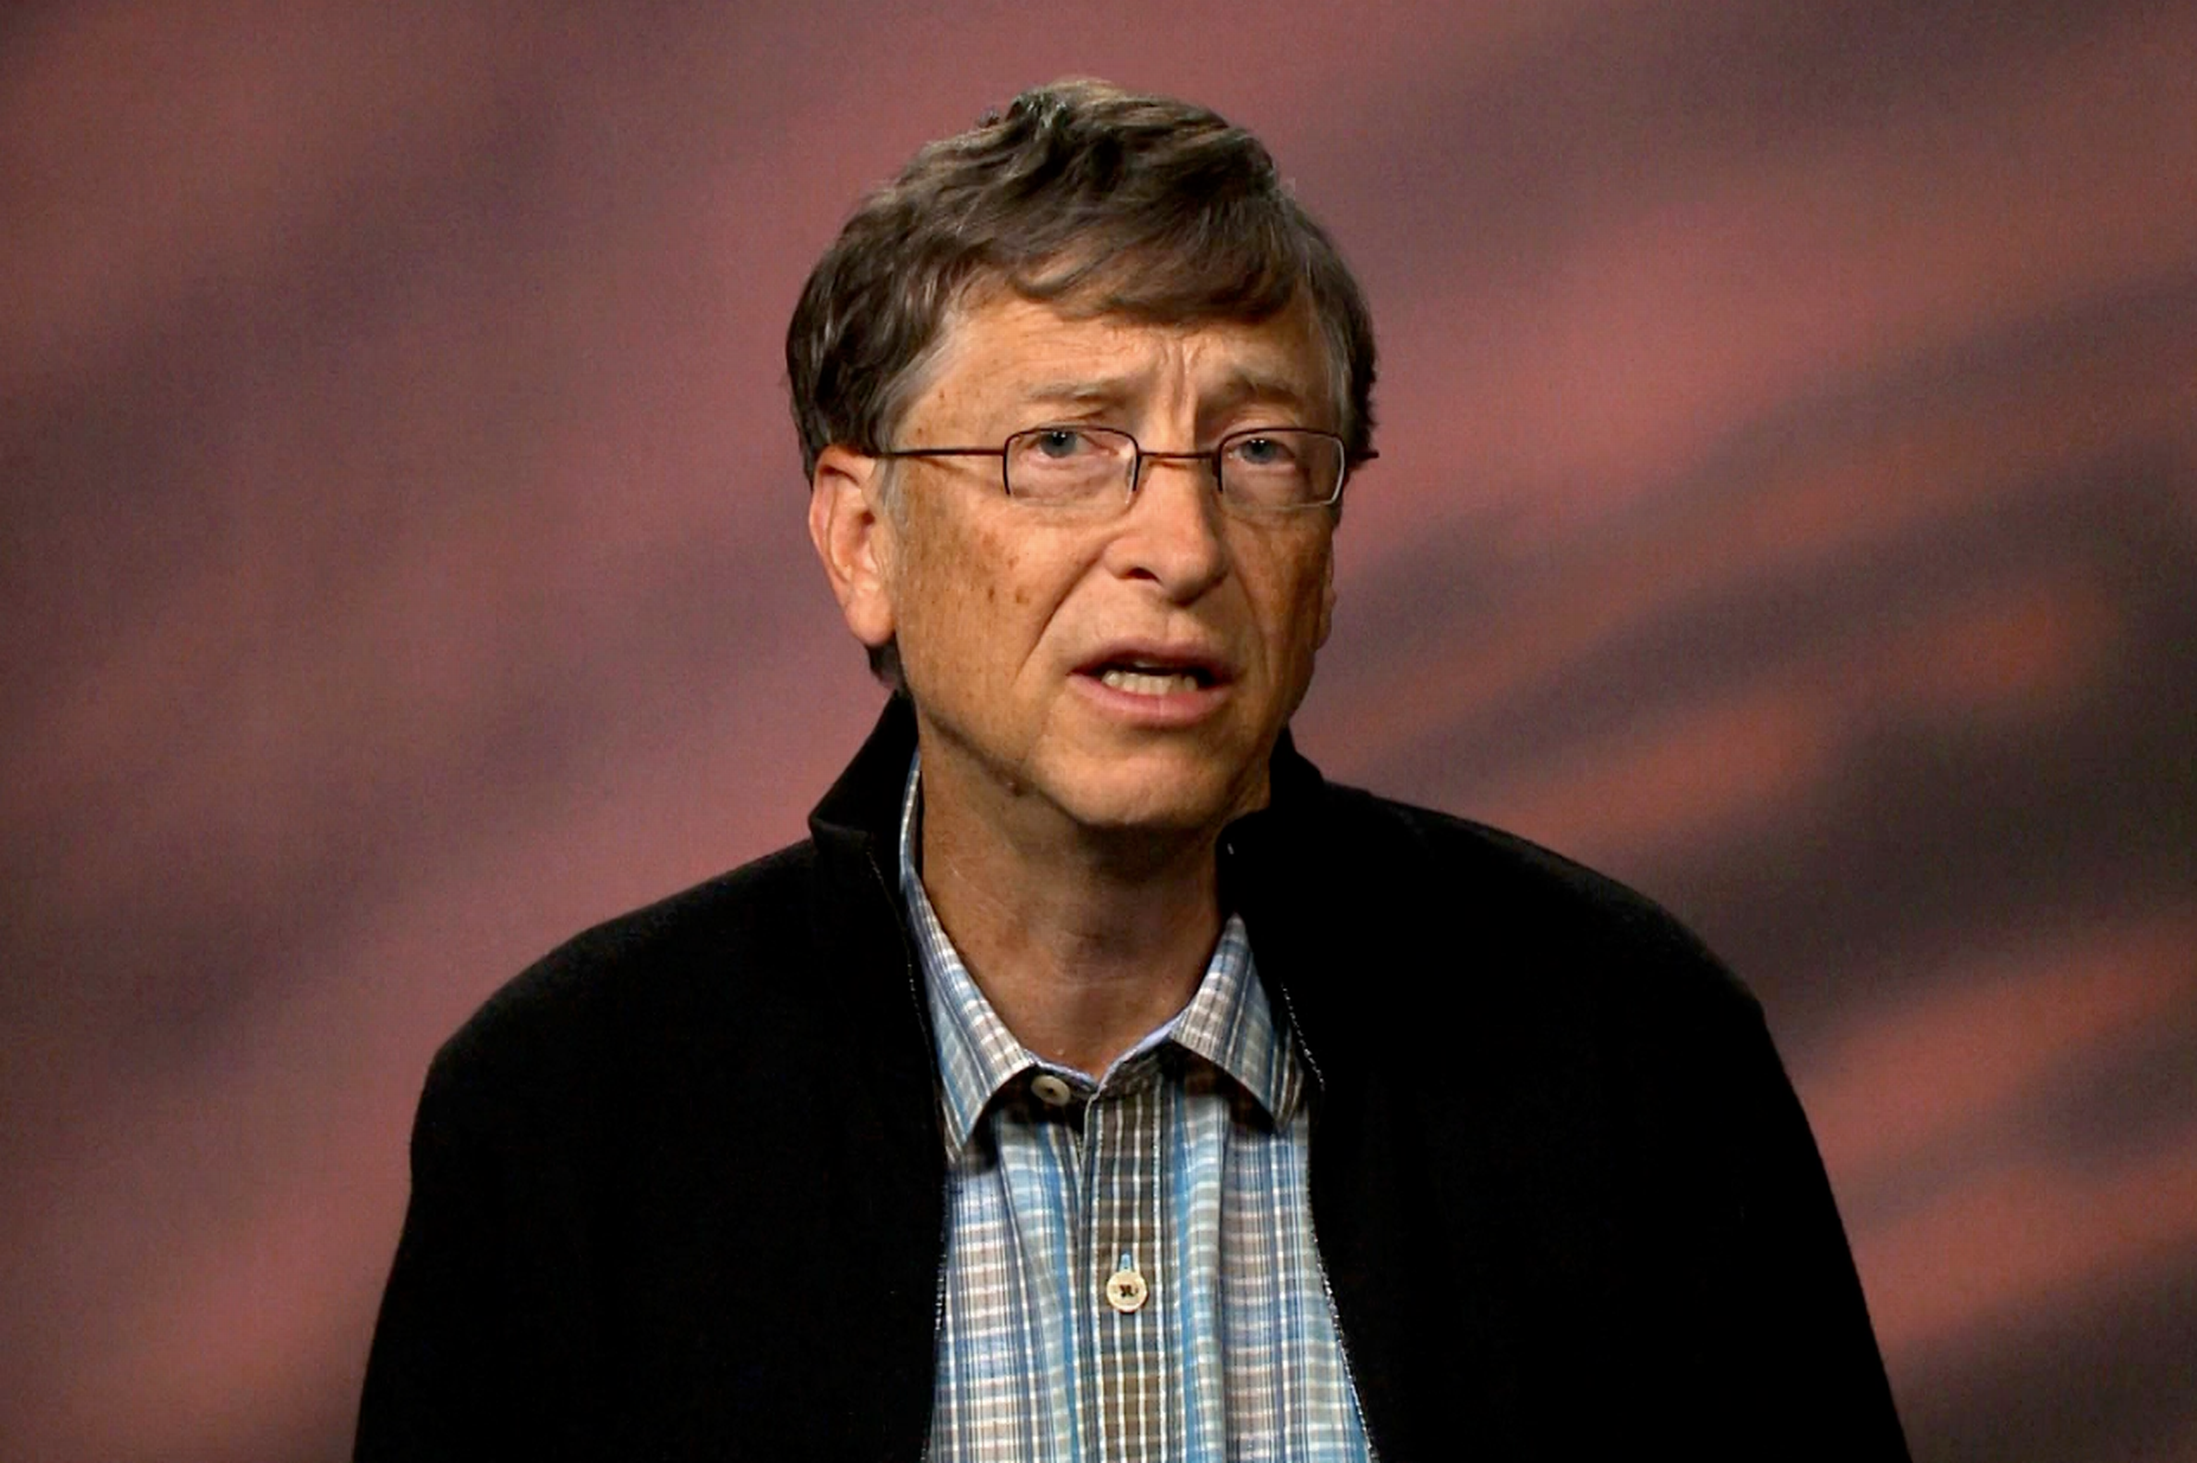 Bill Gates HD Wallpapers amp Pictures Hd Wallpapers 2197x1463